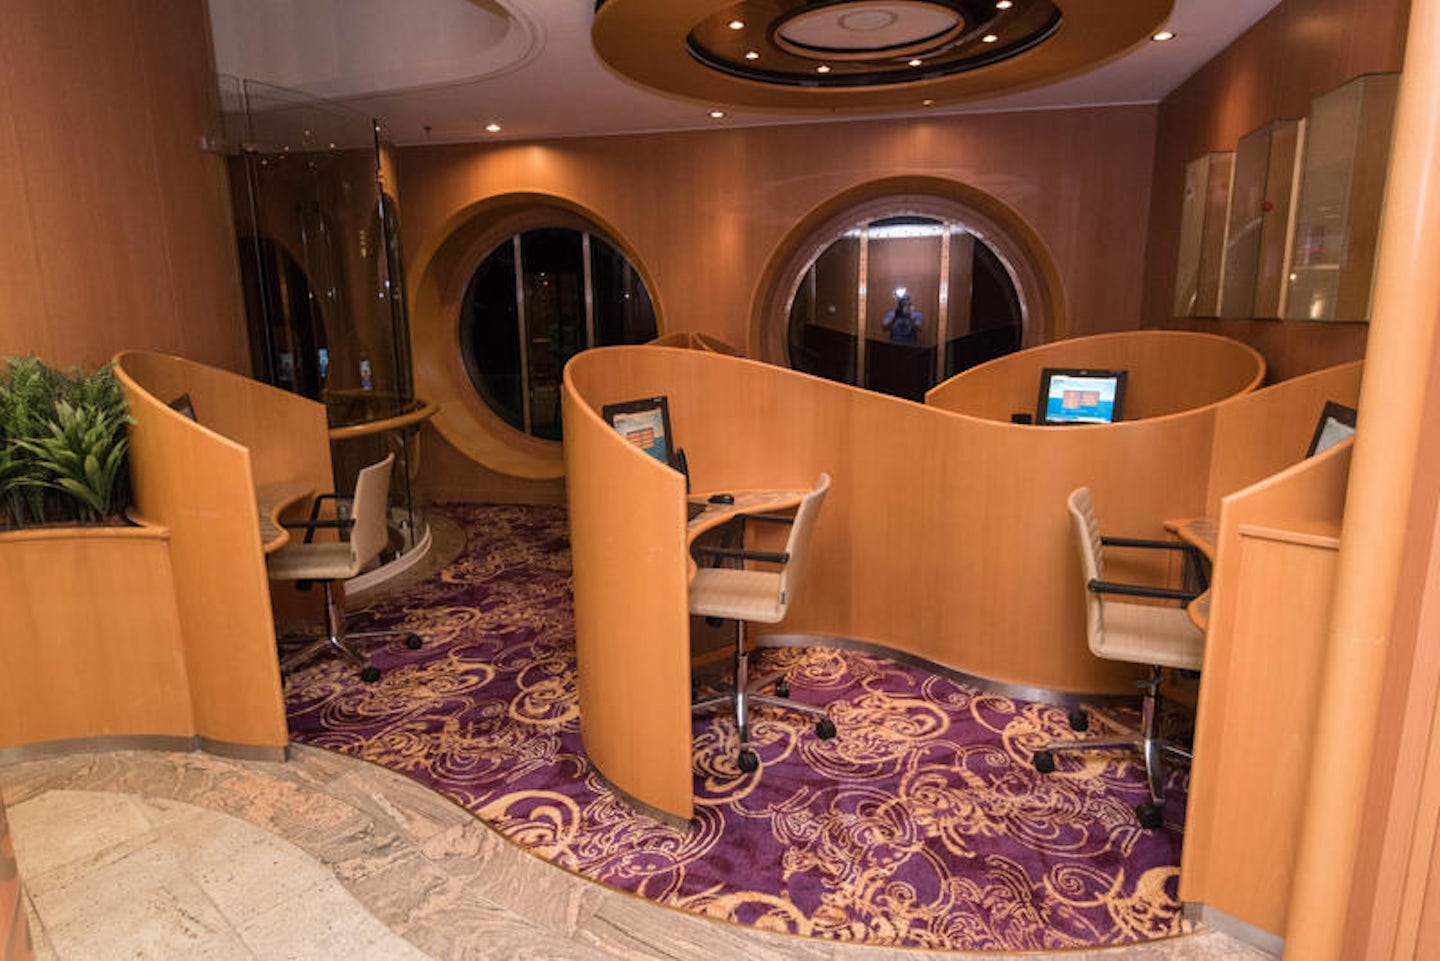 Internet Cafe on Brilliance of the Seas